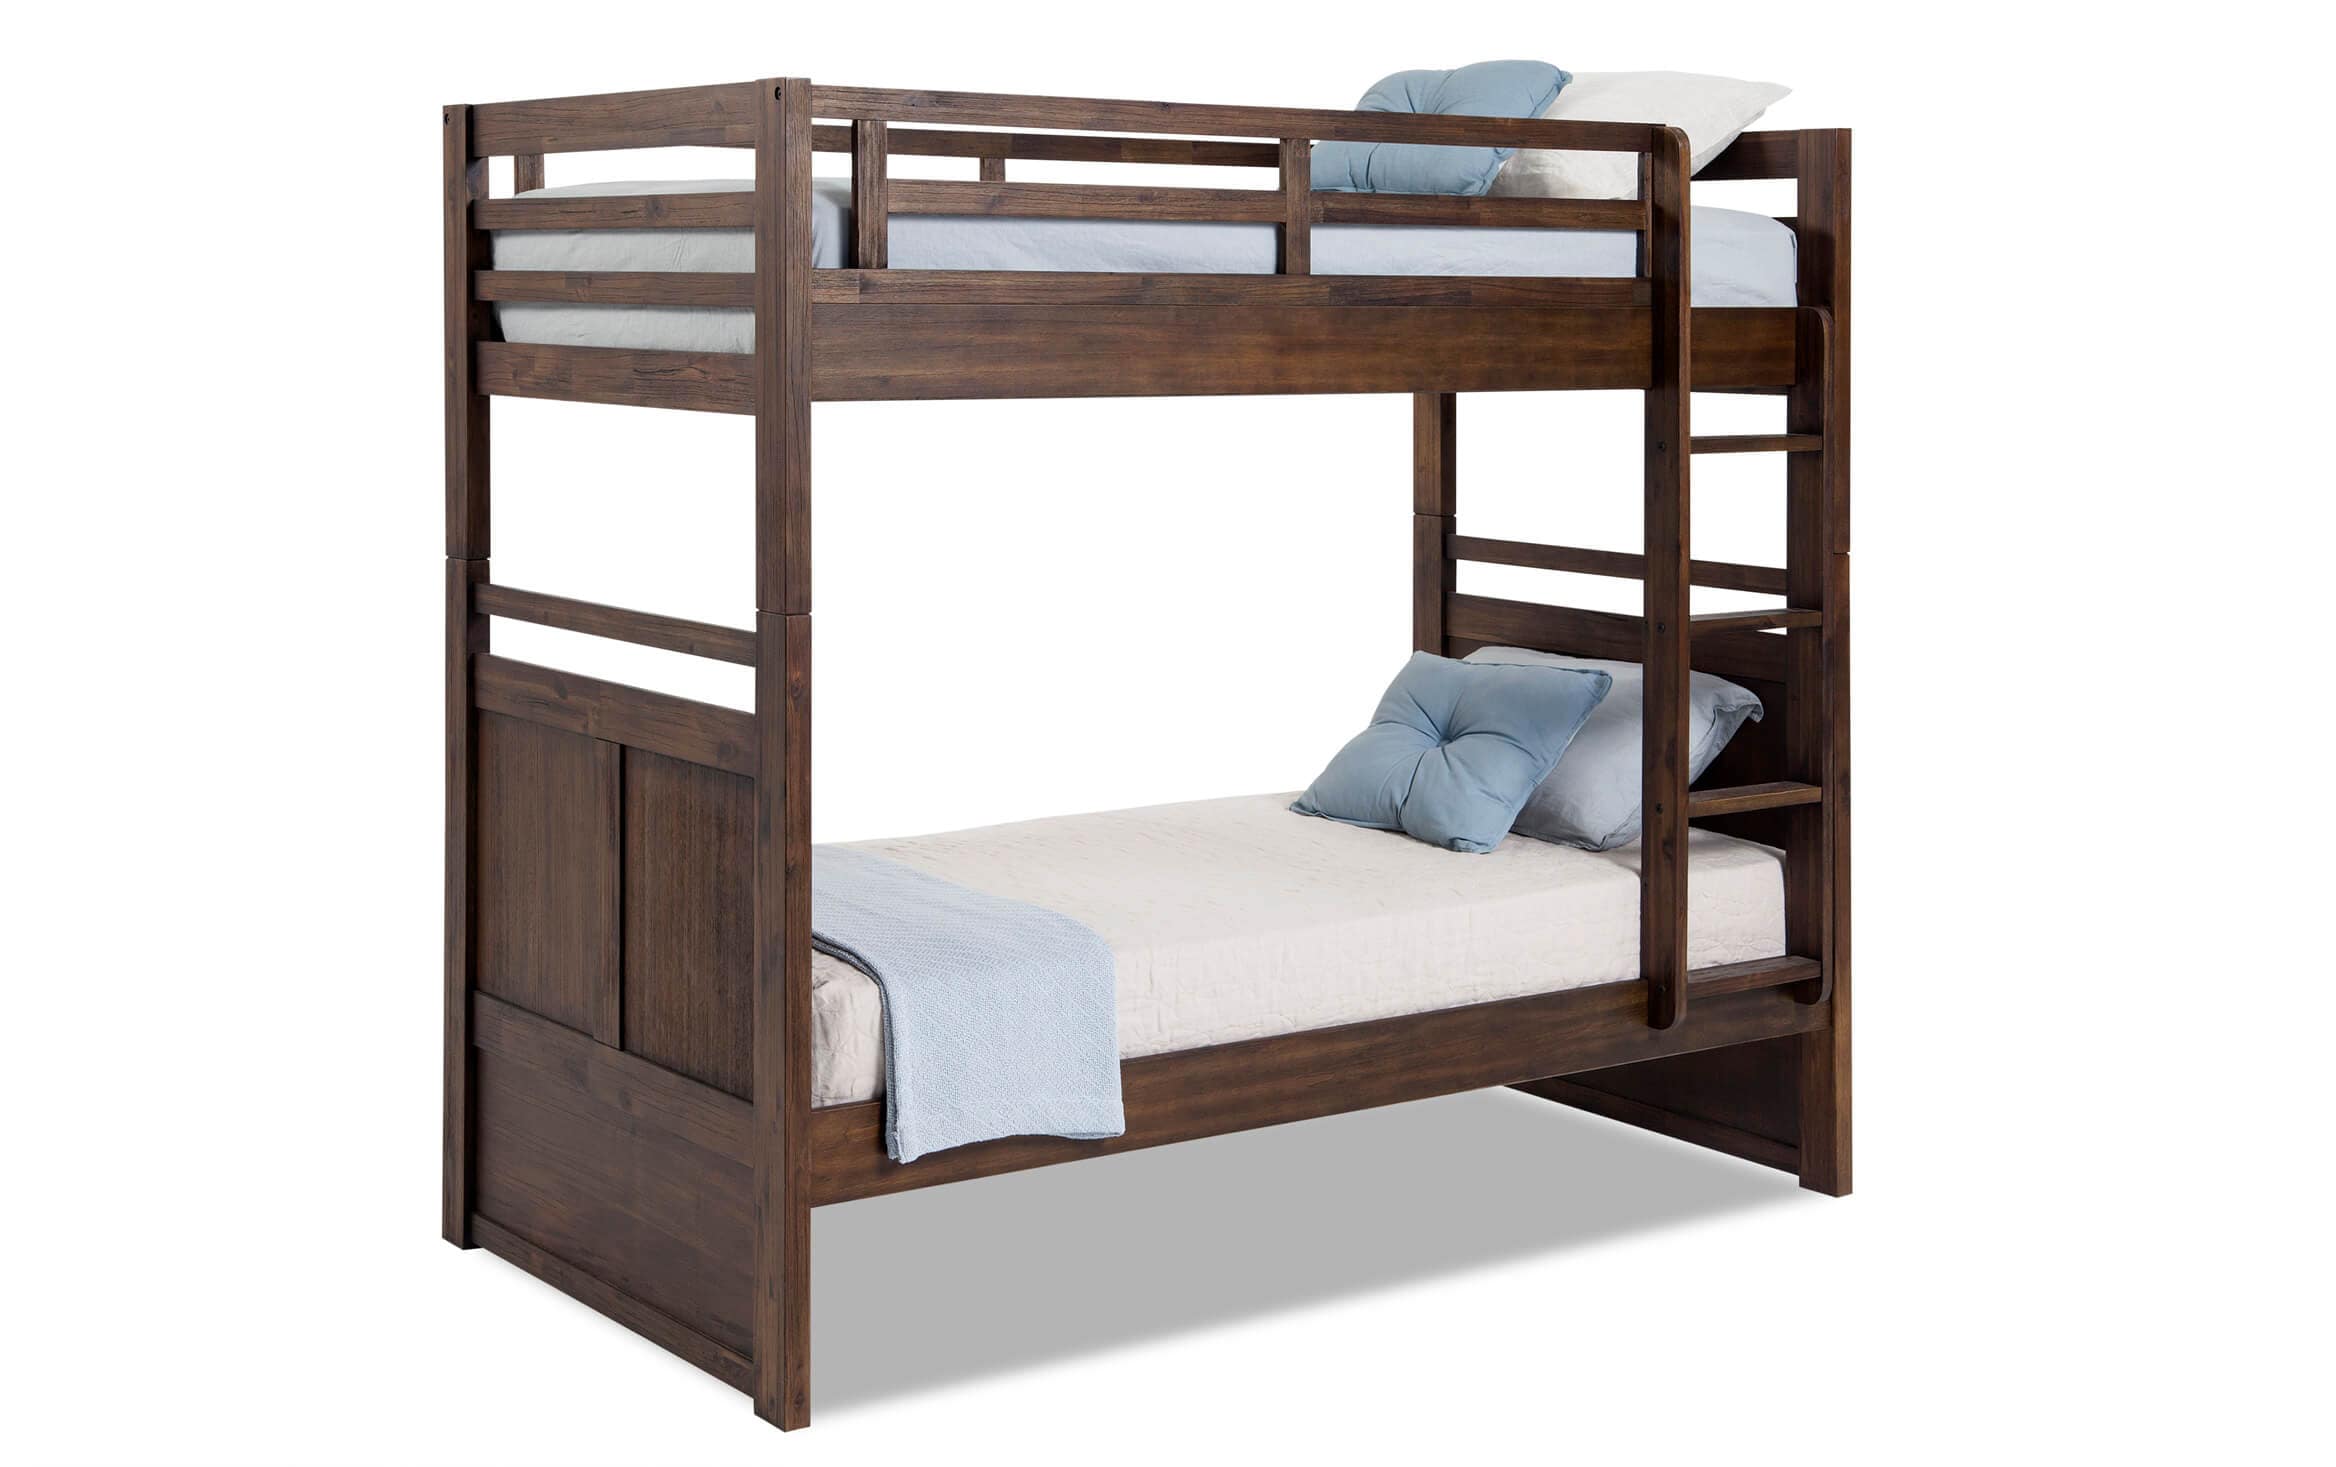 Chadwick Twin Rustic Bunk Bed Bob S, Do Bunk Beds Use Twin Mattresses